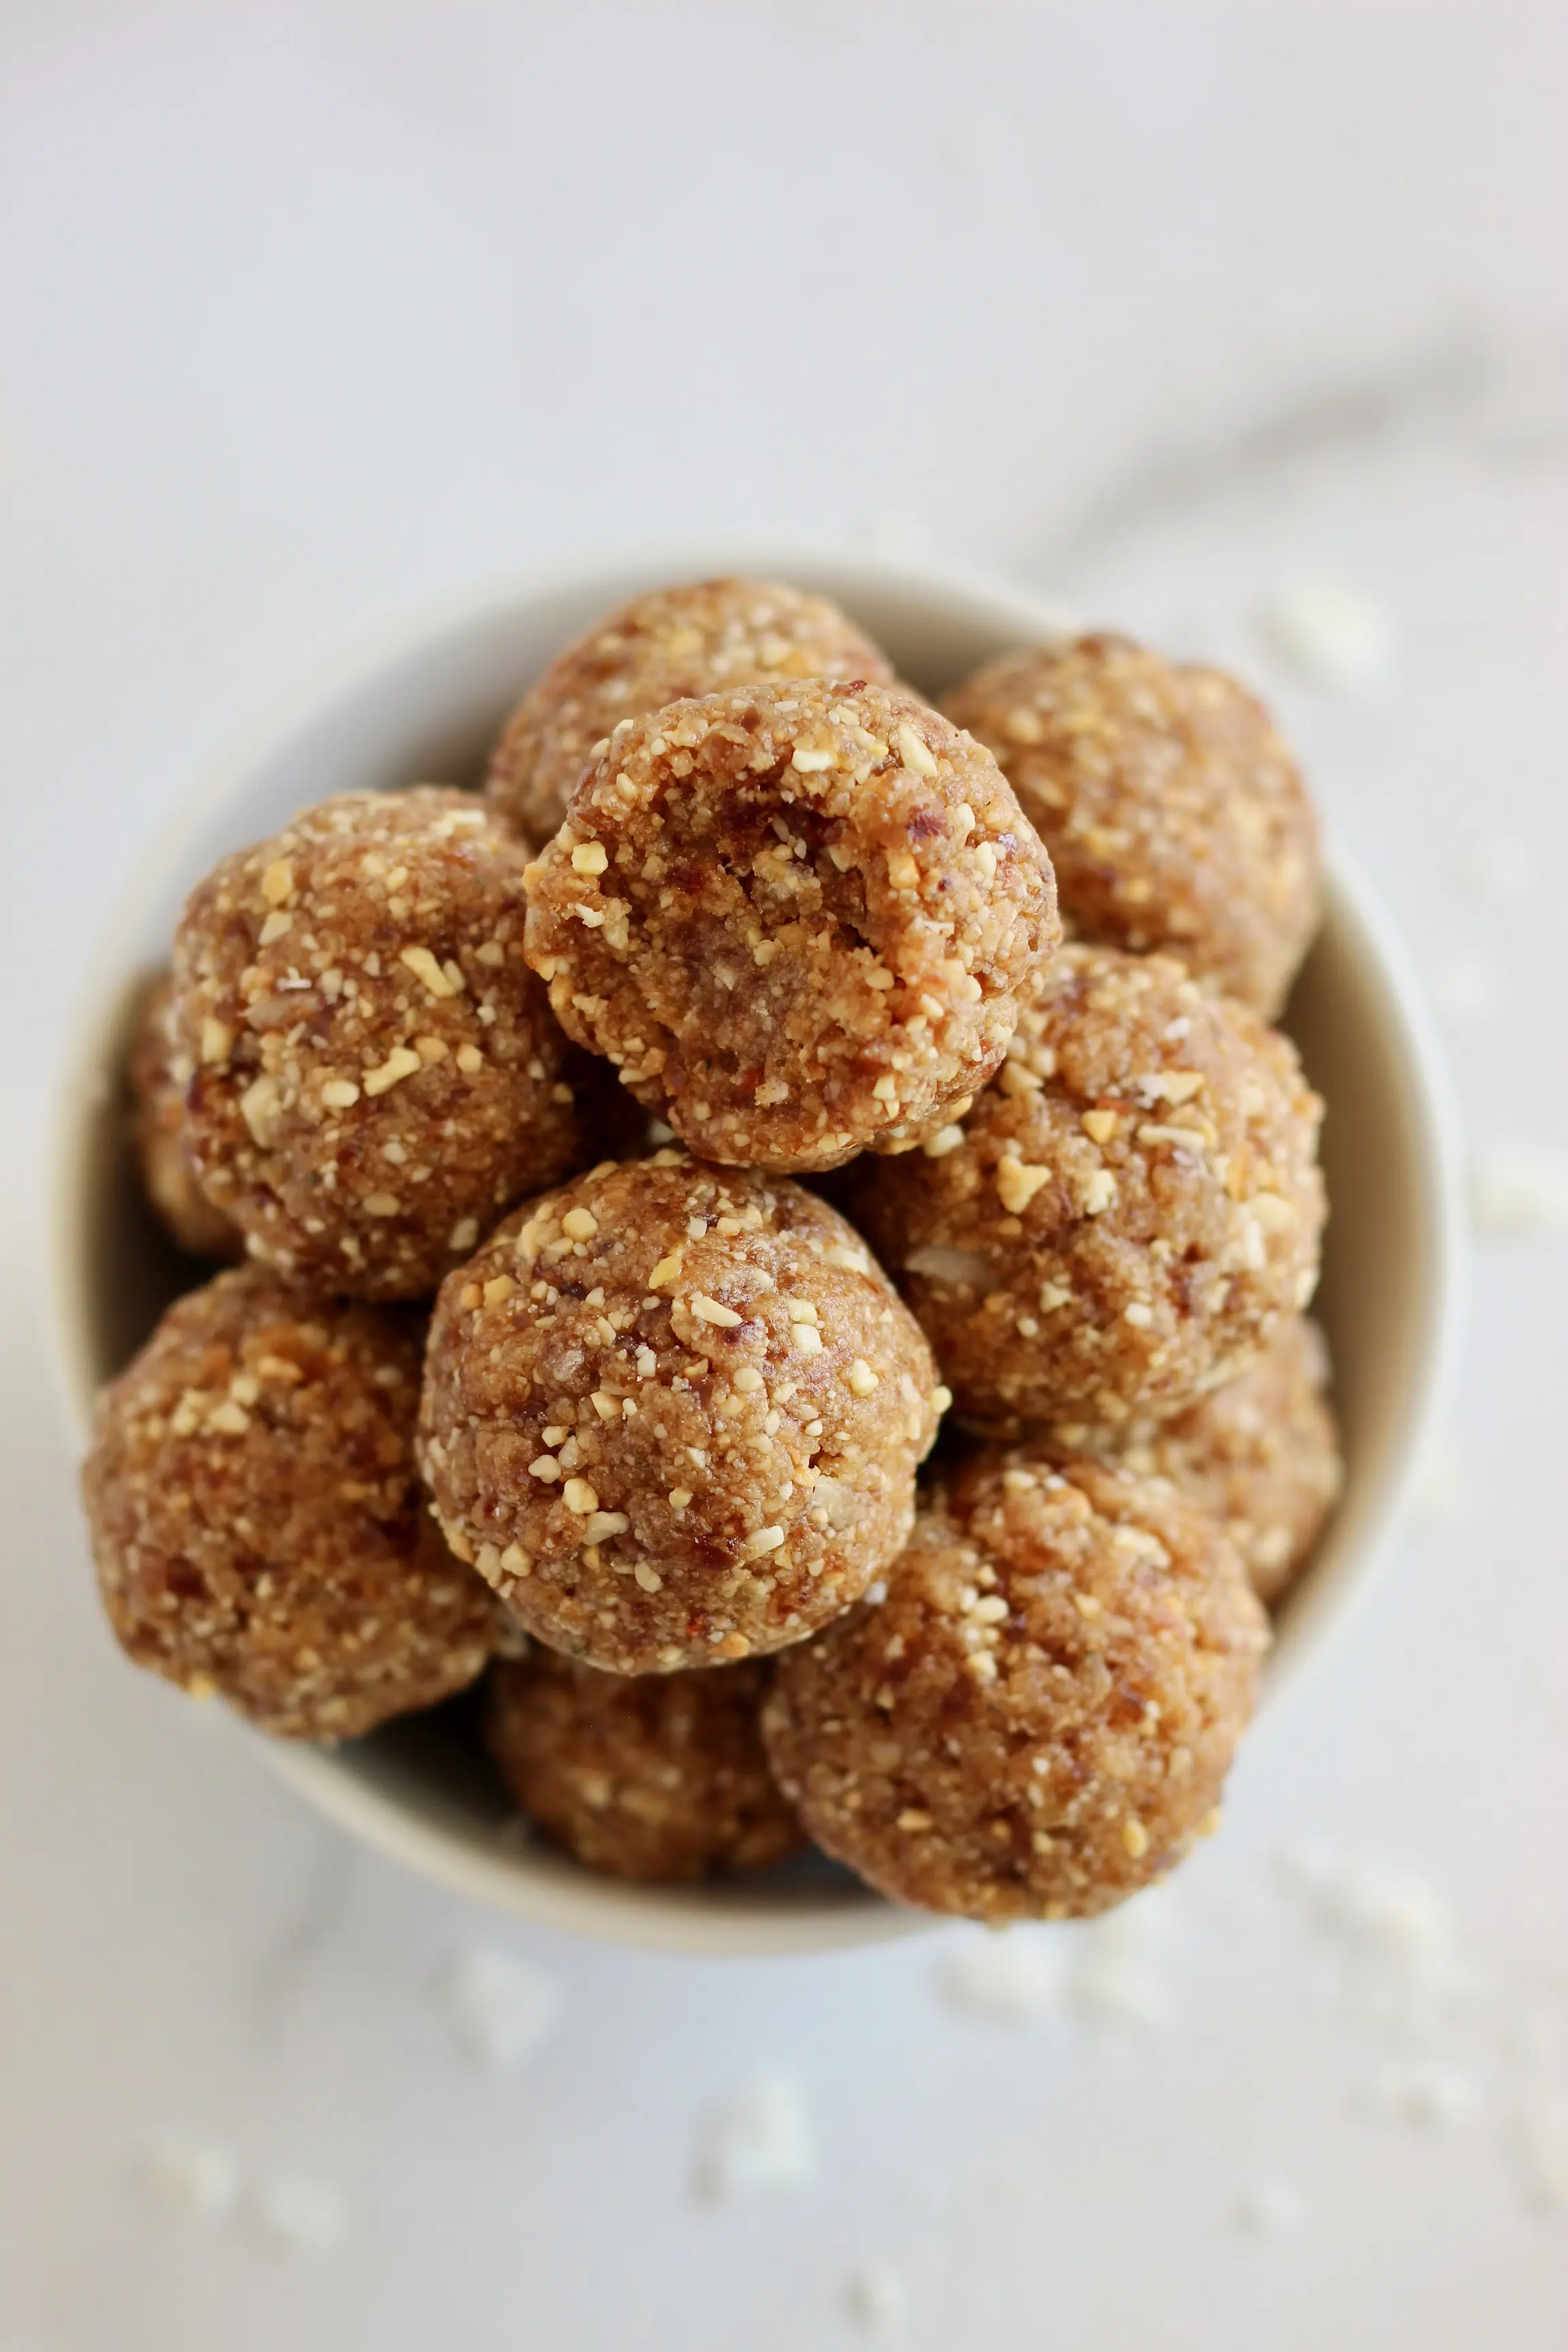 These Salted Caramel Energy Bites make the perfect energizing snack. They are packed with plant based protein to power your day. Plus, they are gluten-free, vegan, and have no added sugars! #VeganSnack #SaltedCaramel #EnergyBites #ProteinBites #Dates